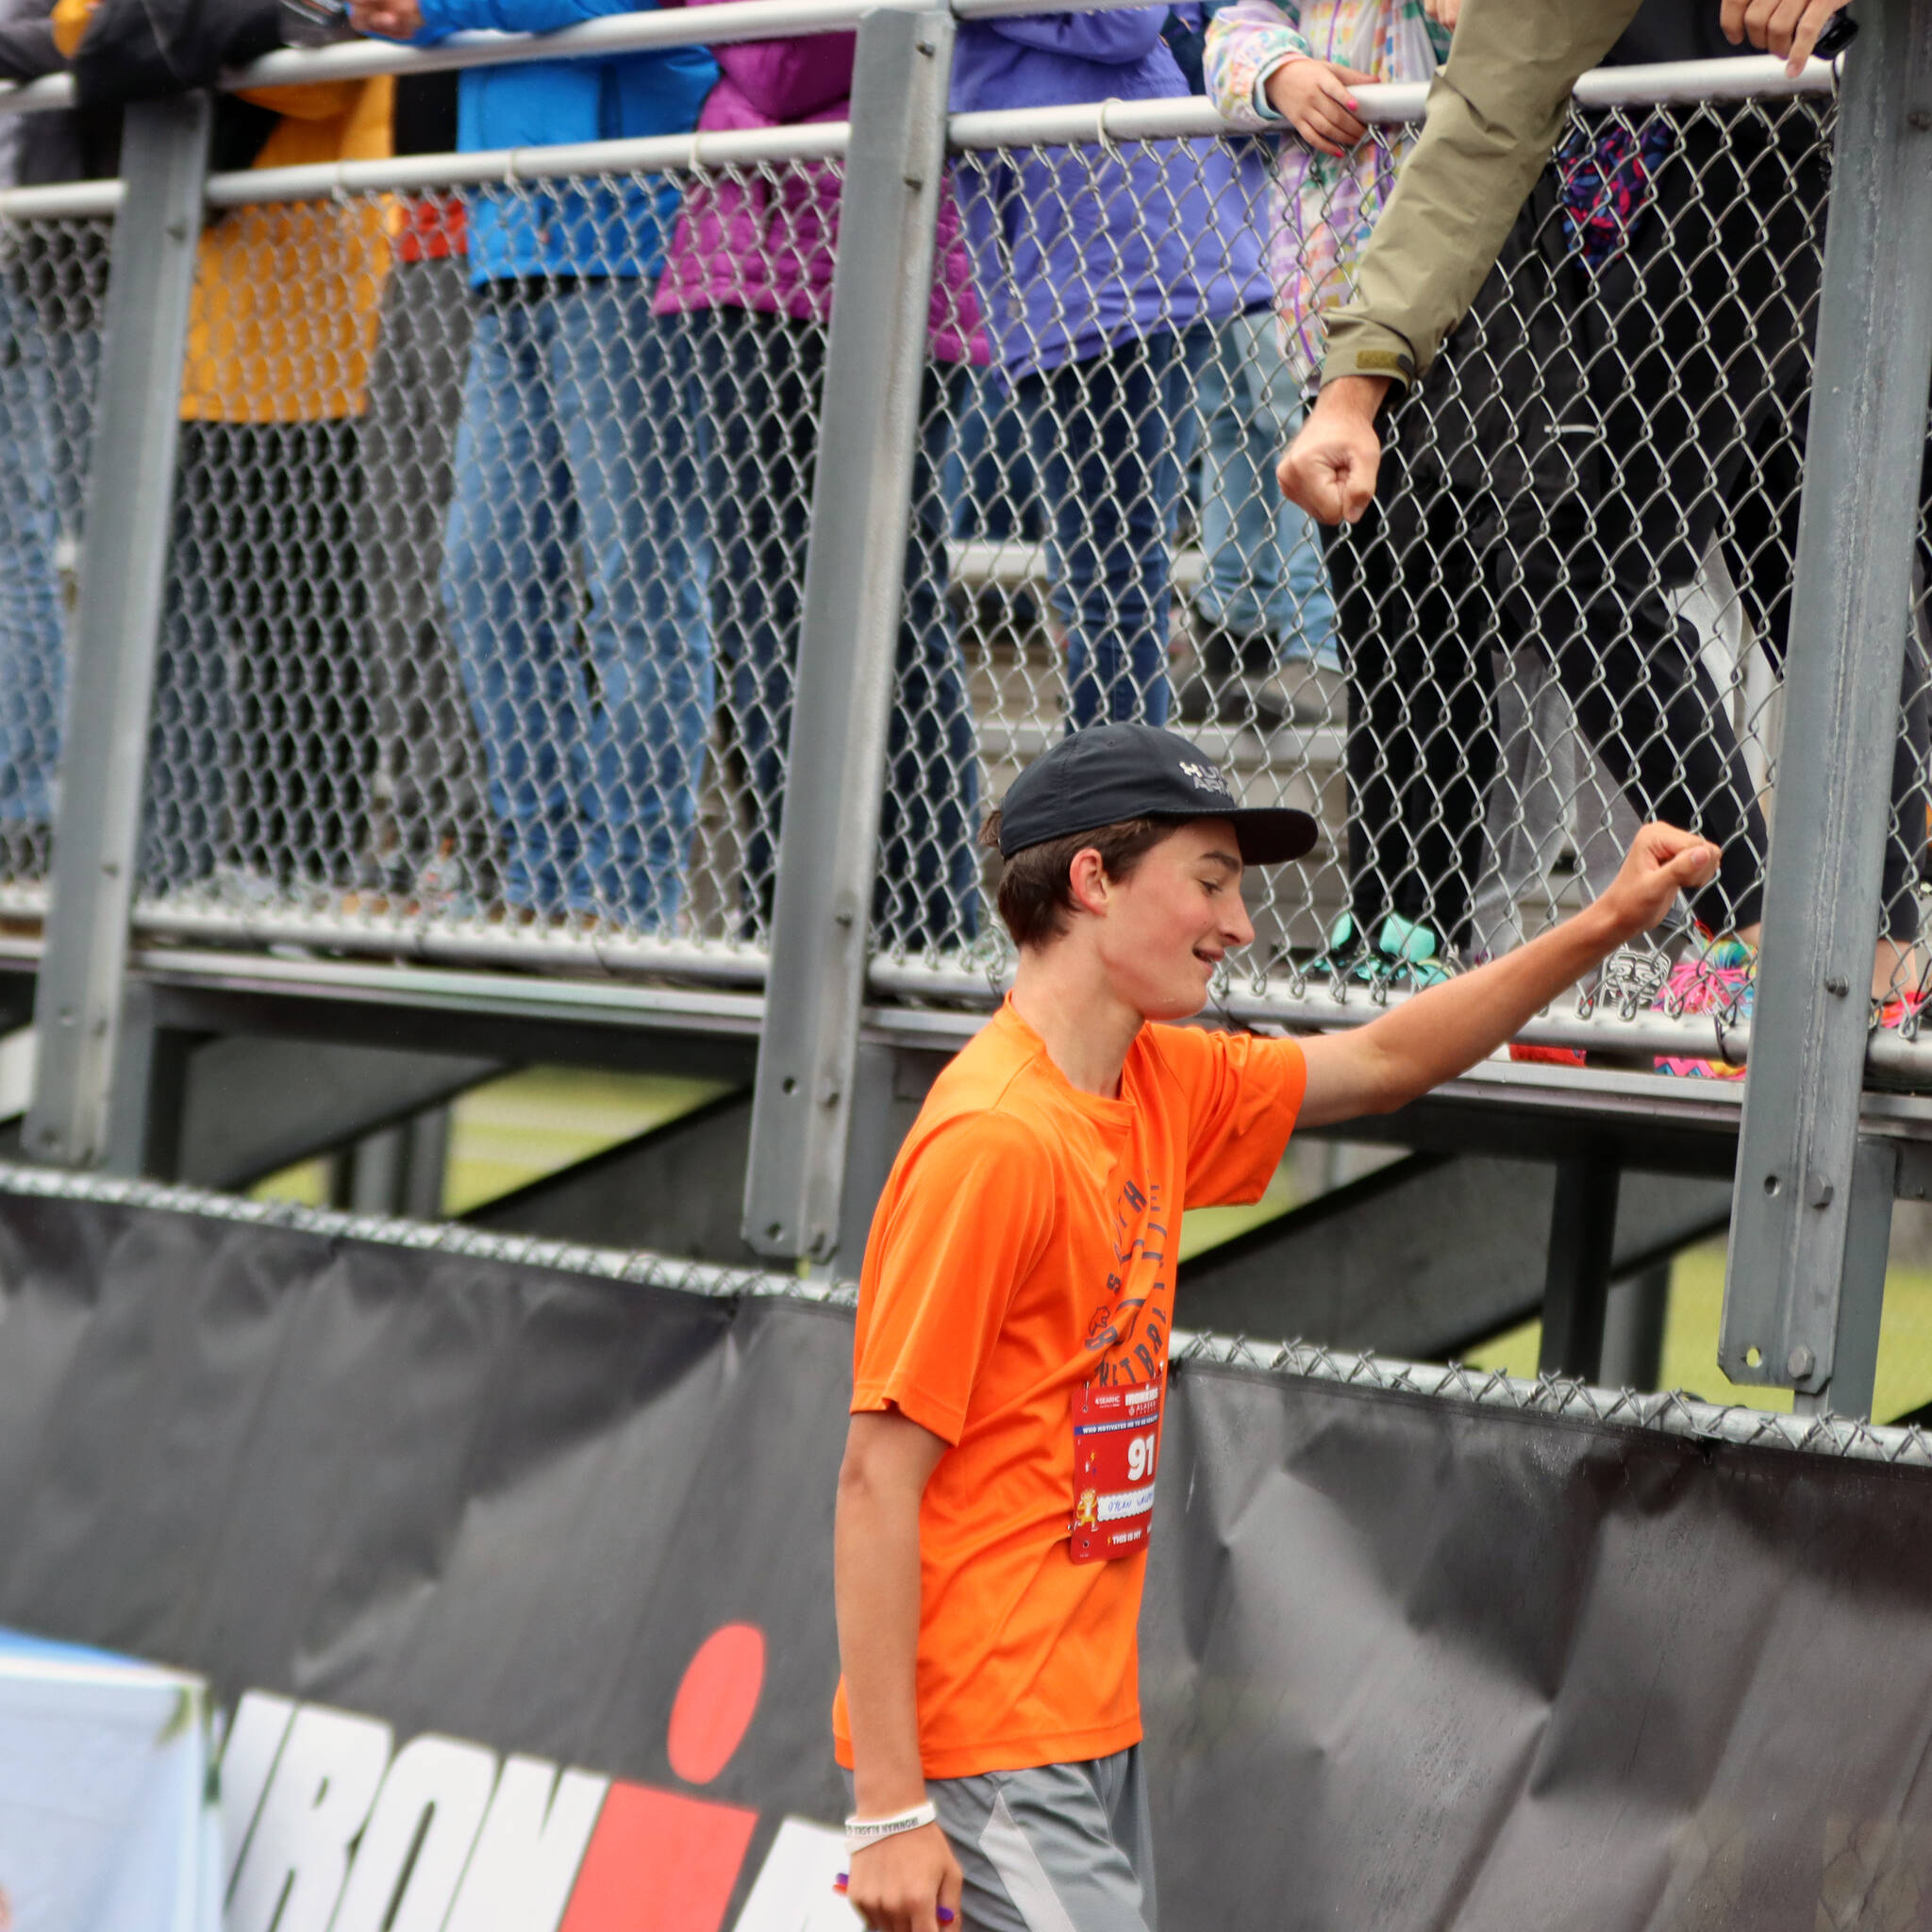 Dylyan Walerius, 14, of Sylvania, Ohio, lowers his hand after giving a fistbump shortly after finishing a 1-mile run. Walerius, who was in town with an adult competing in Ironman Alaska, said the 1600-meter is his event in track. It was evident as Walerius finished in second place in his fun run heat. (Ben Hohenstatt / Juneau Empire)